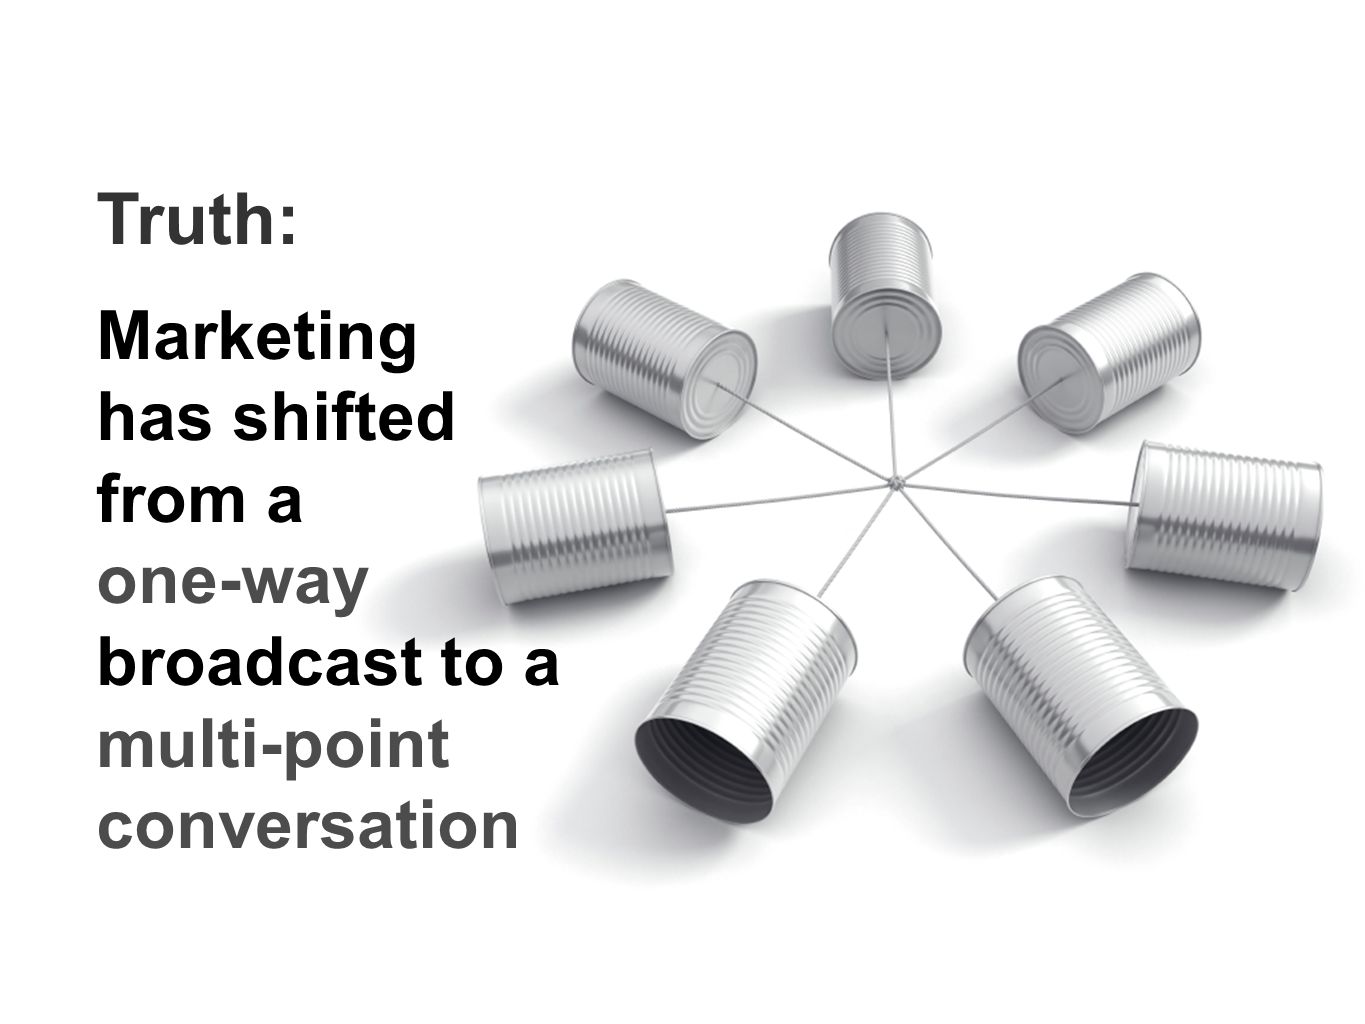 Truth: Marketing has shifted from a one-way broadcast to a multi-point conversation